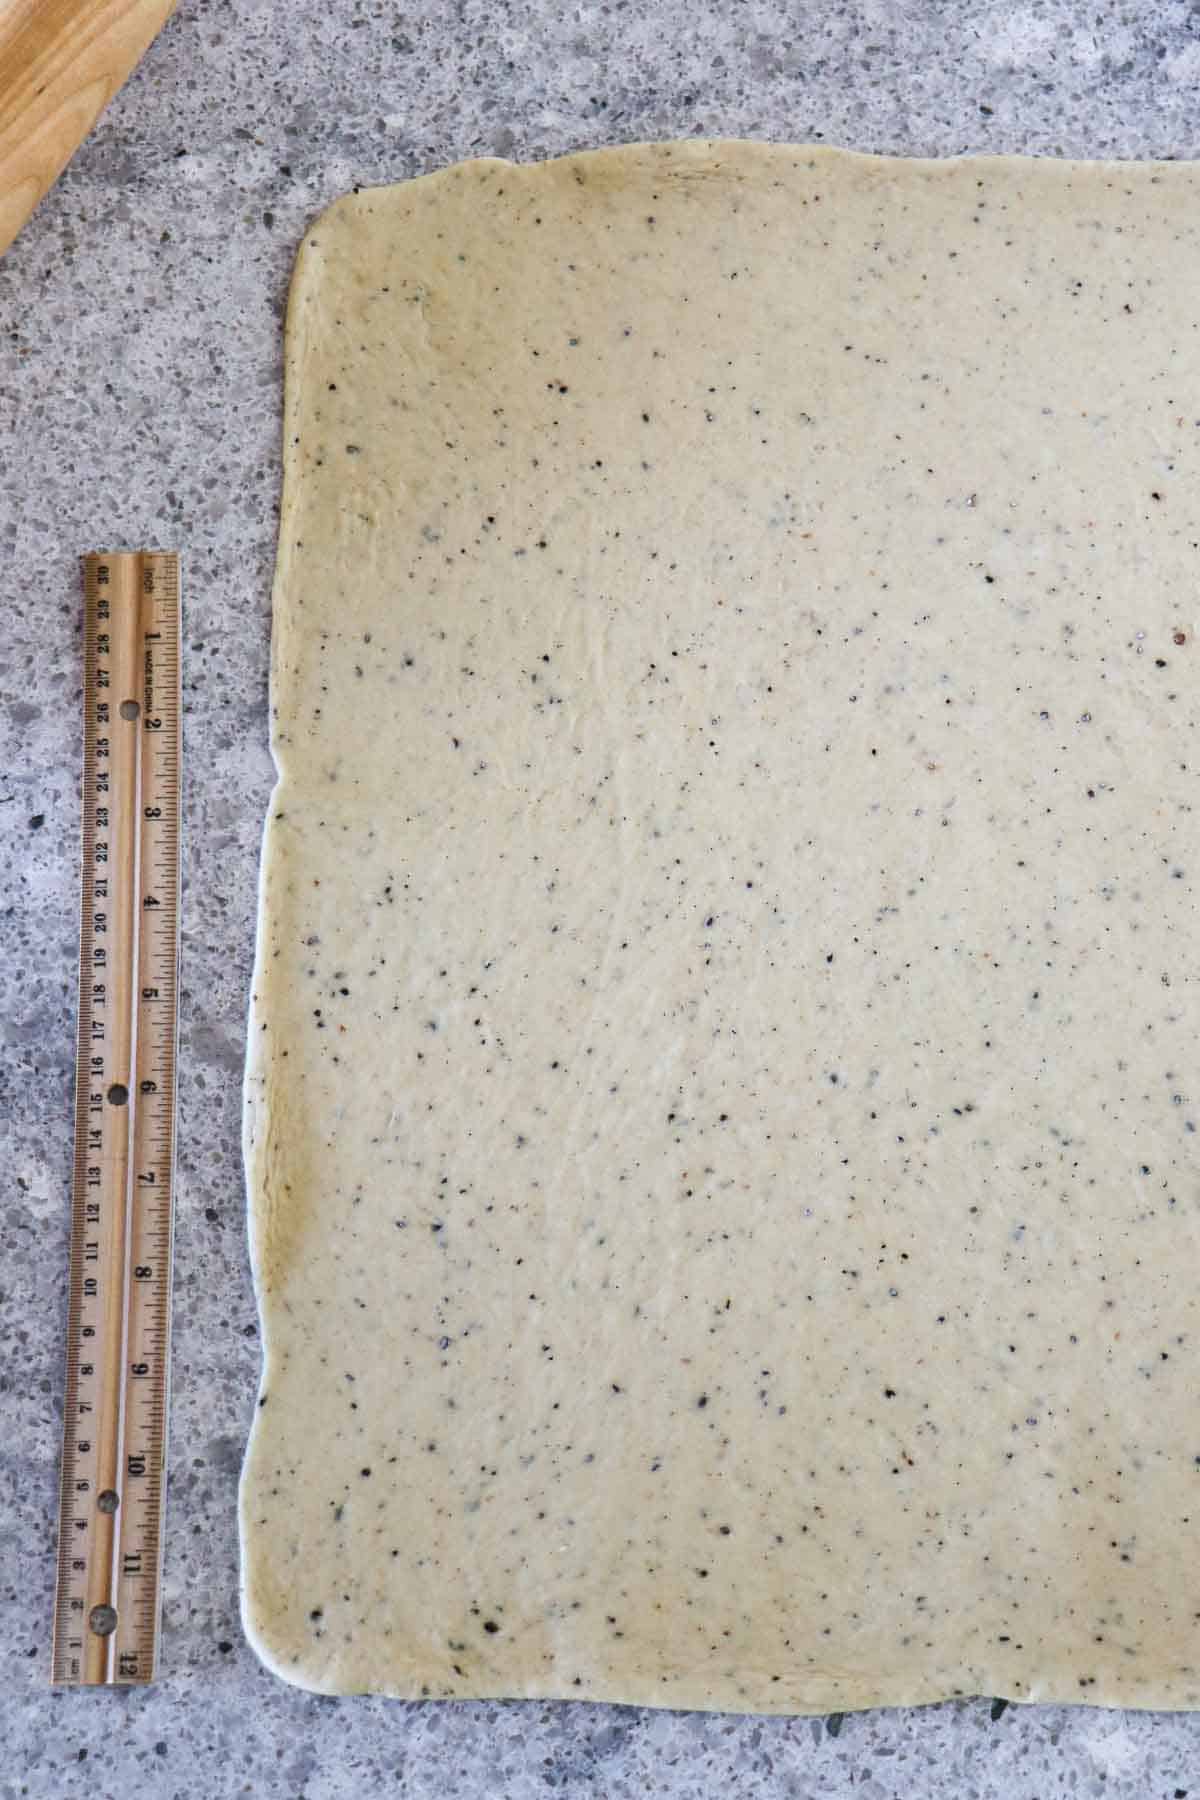 Rolled out cardamom dough on a counter next to a ruler.